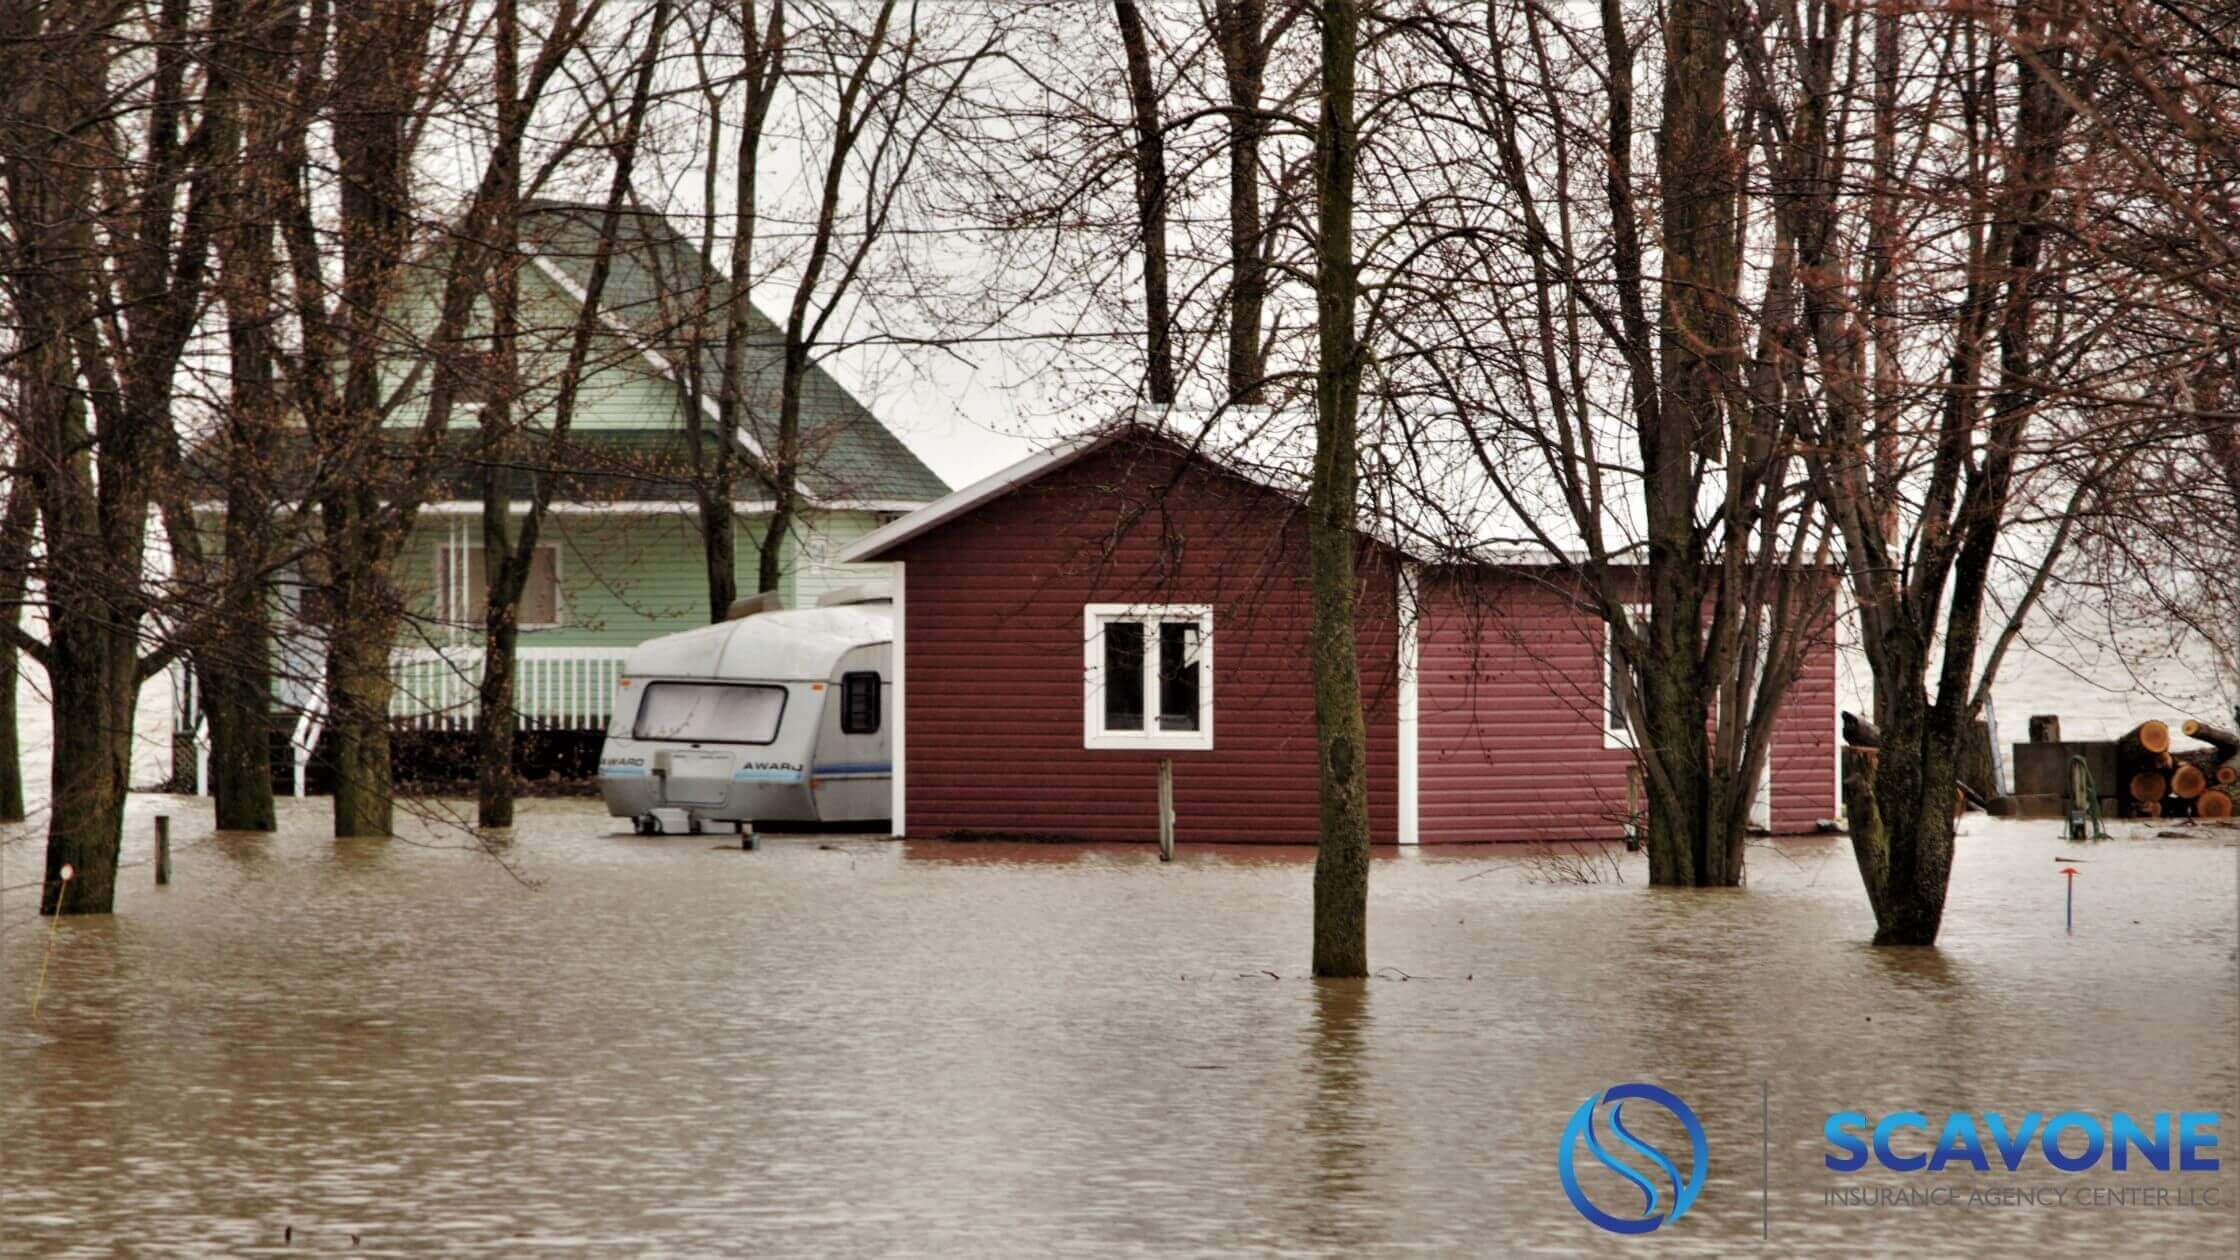 Flood Insurance: Does It Cover Foundation Repair?